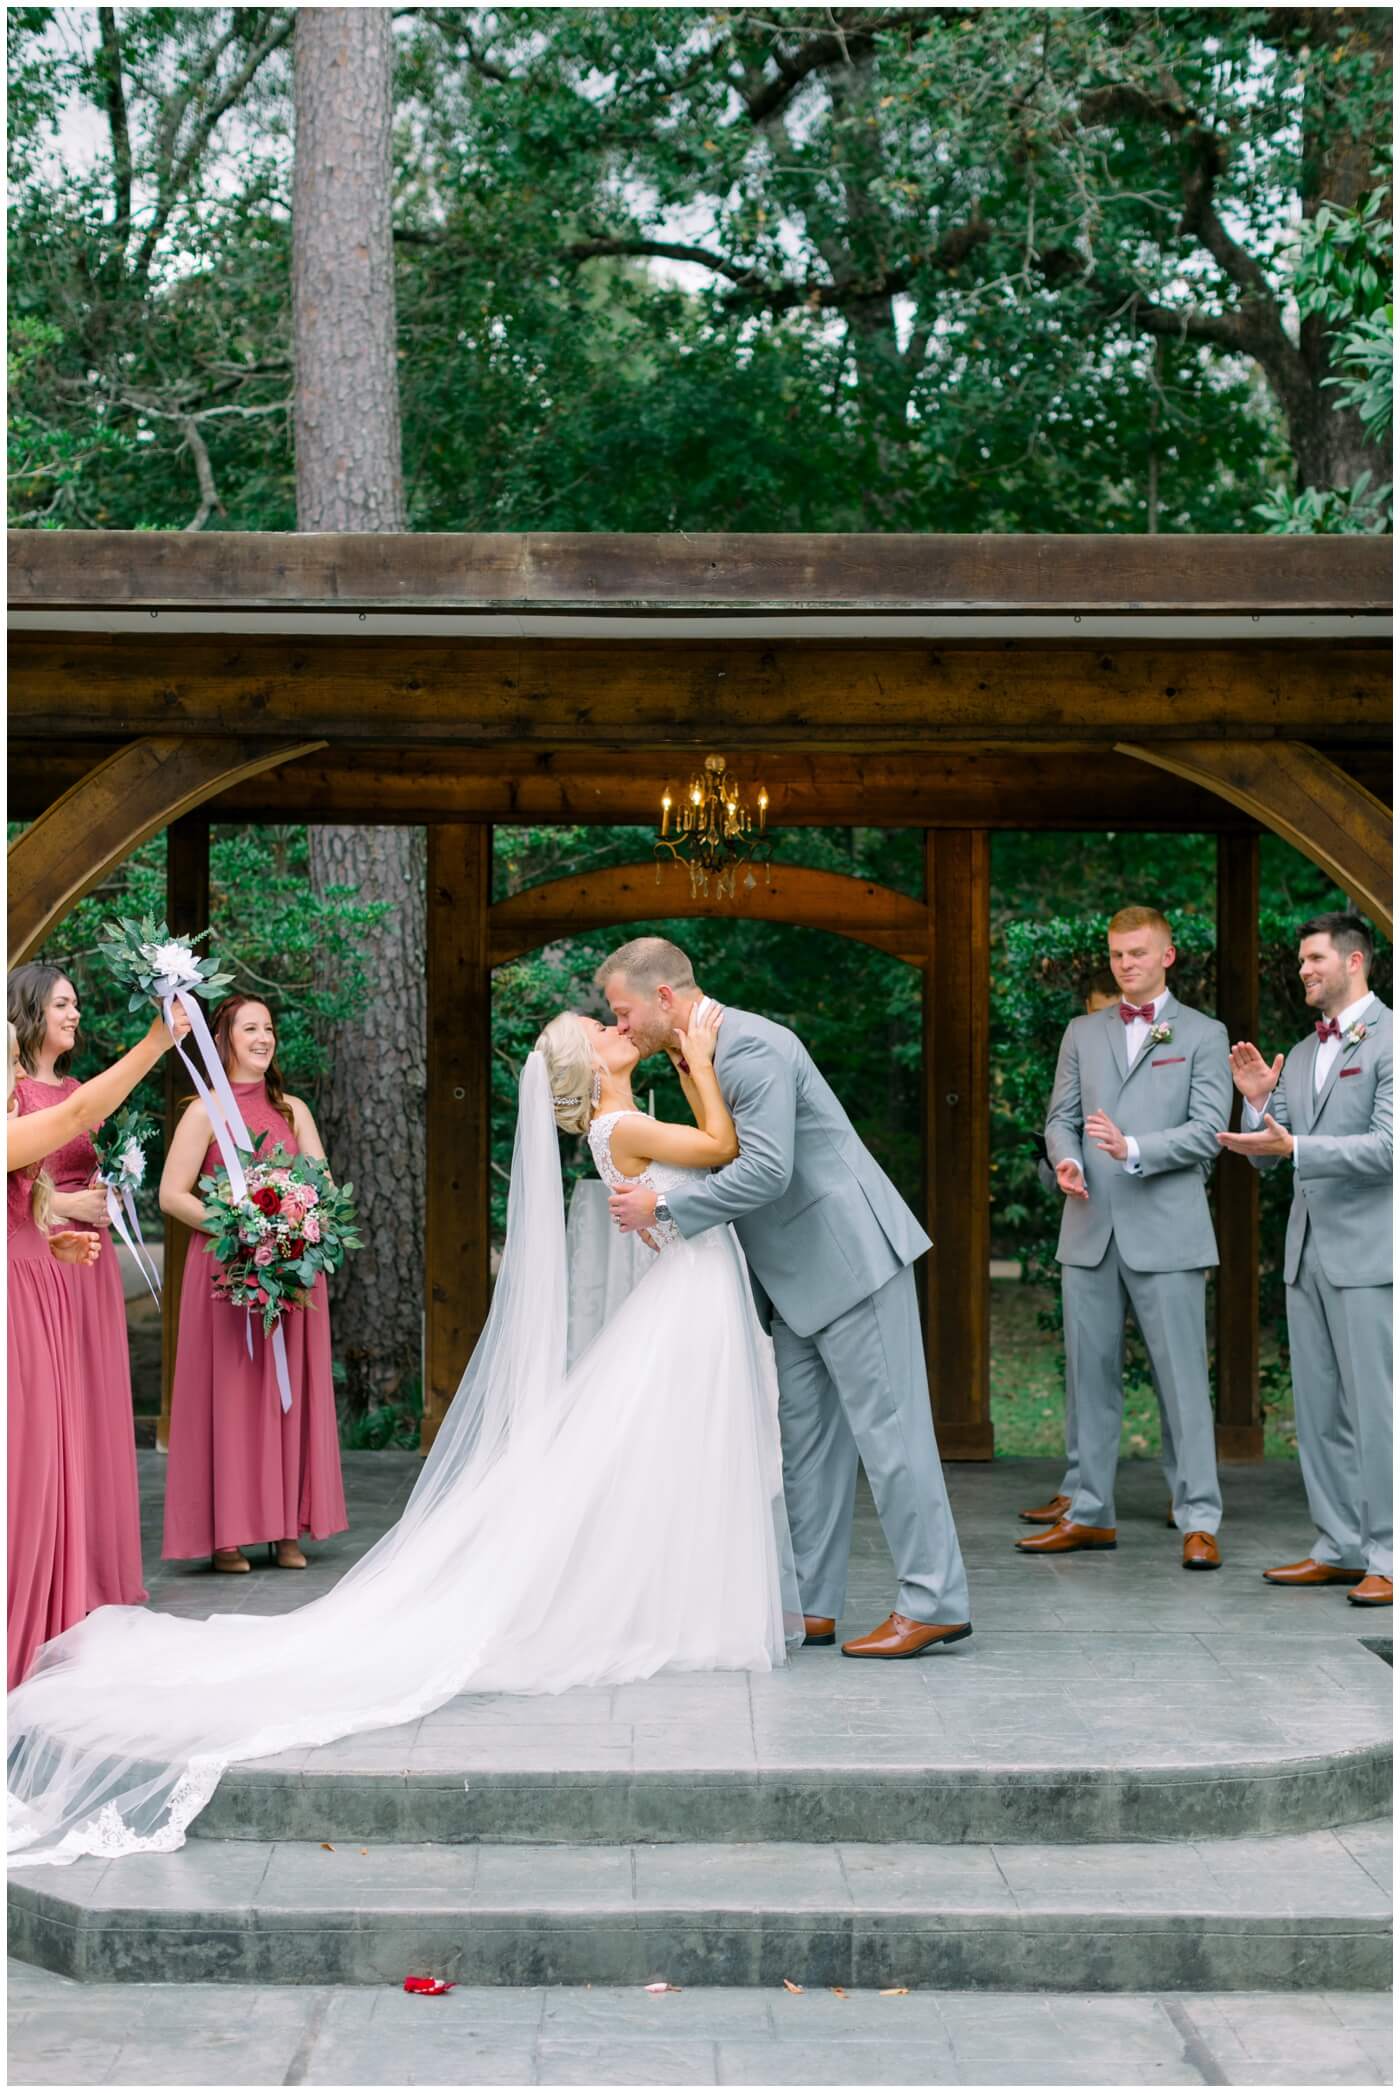 the bride and groom share their first kiss at their texas wedding